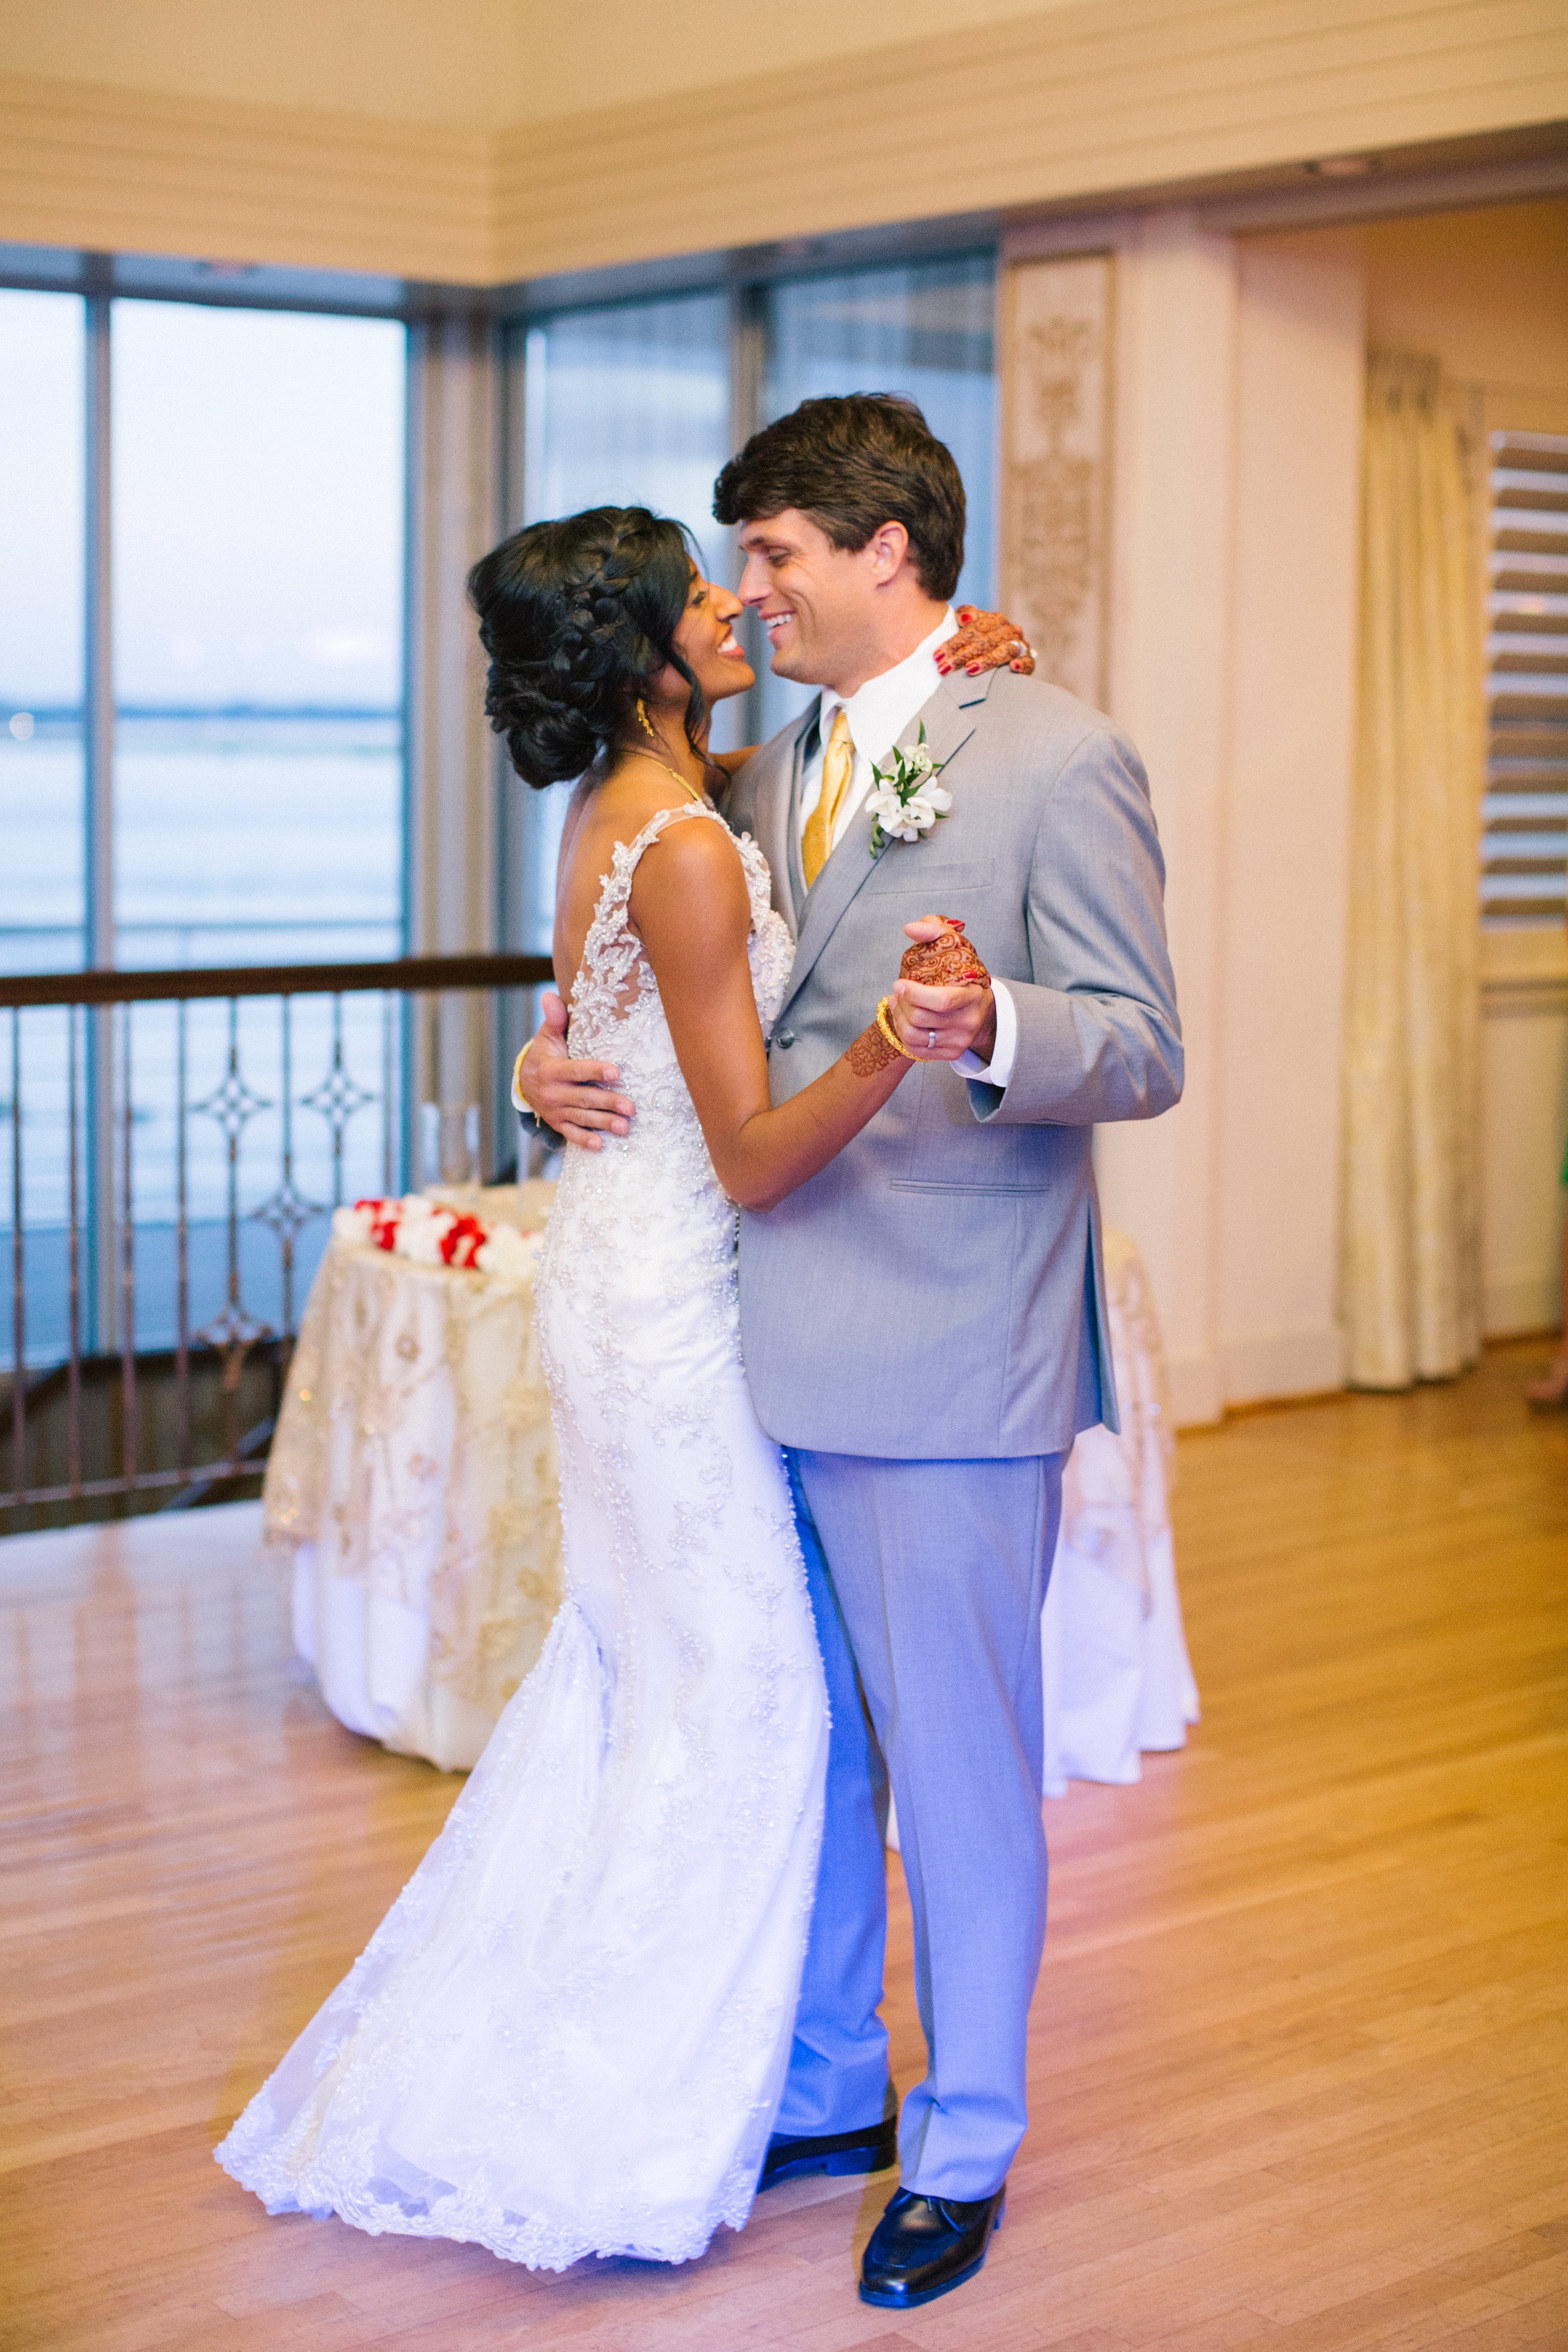 View More: http://chelseaandersonphotography.pass.us/greg-and-trina